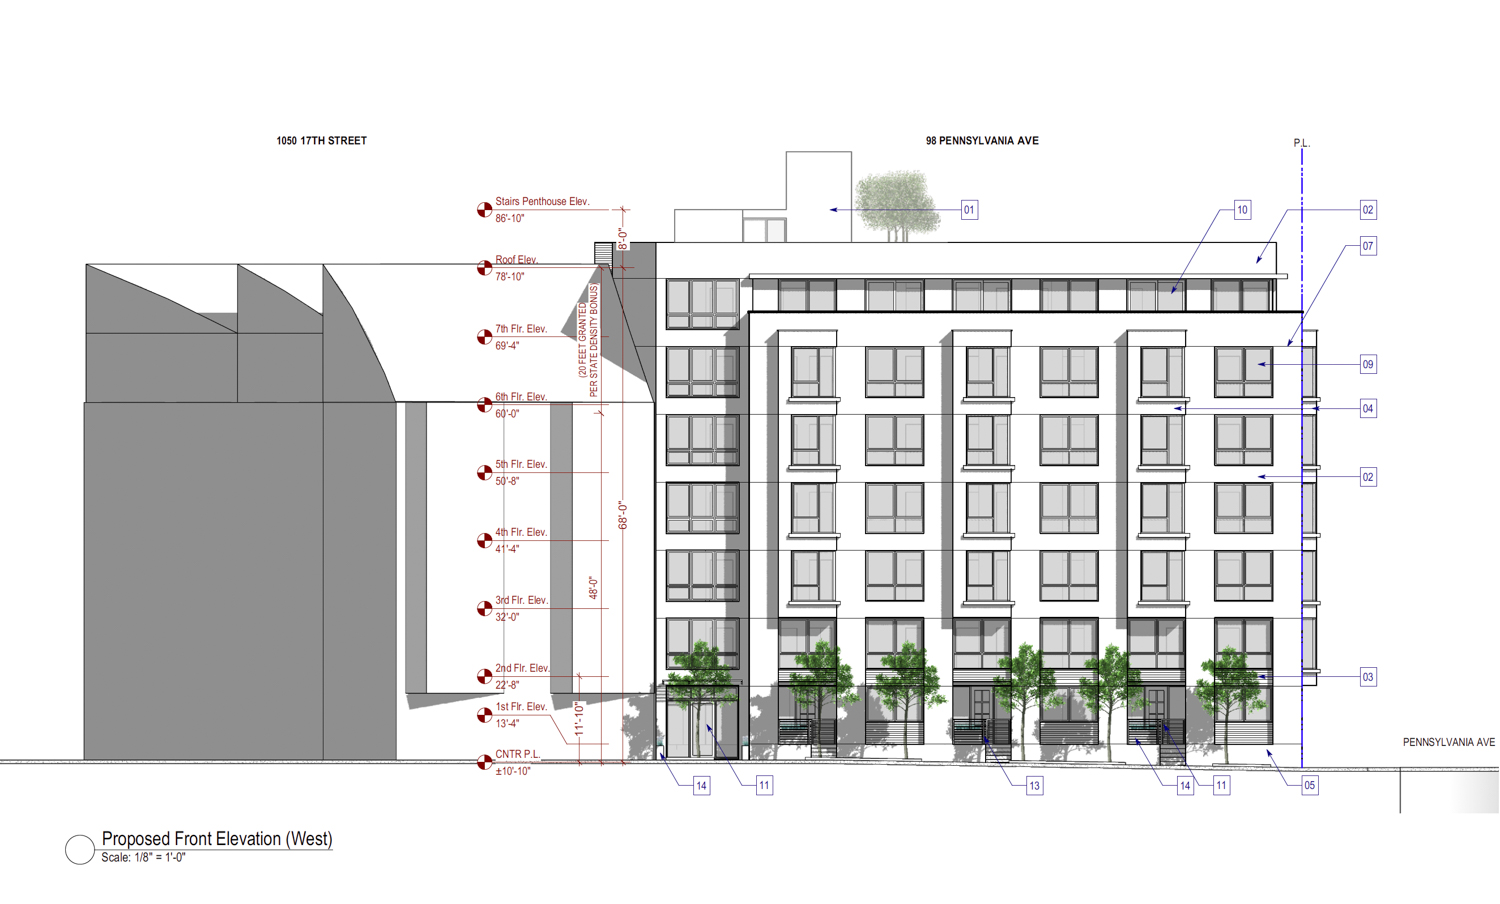 98 Pennsylvania Avenue vertical elevation, drawing courtesy SIA Consulting